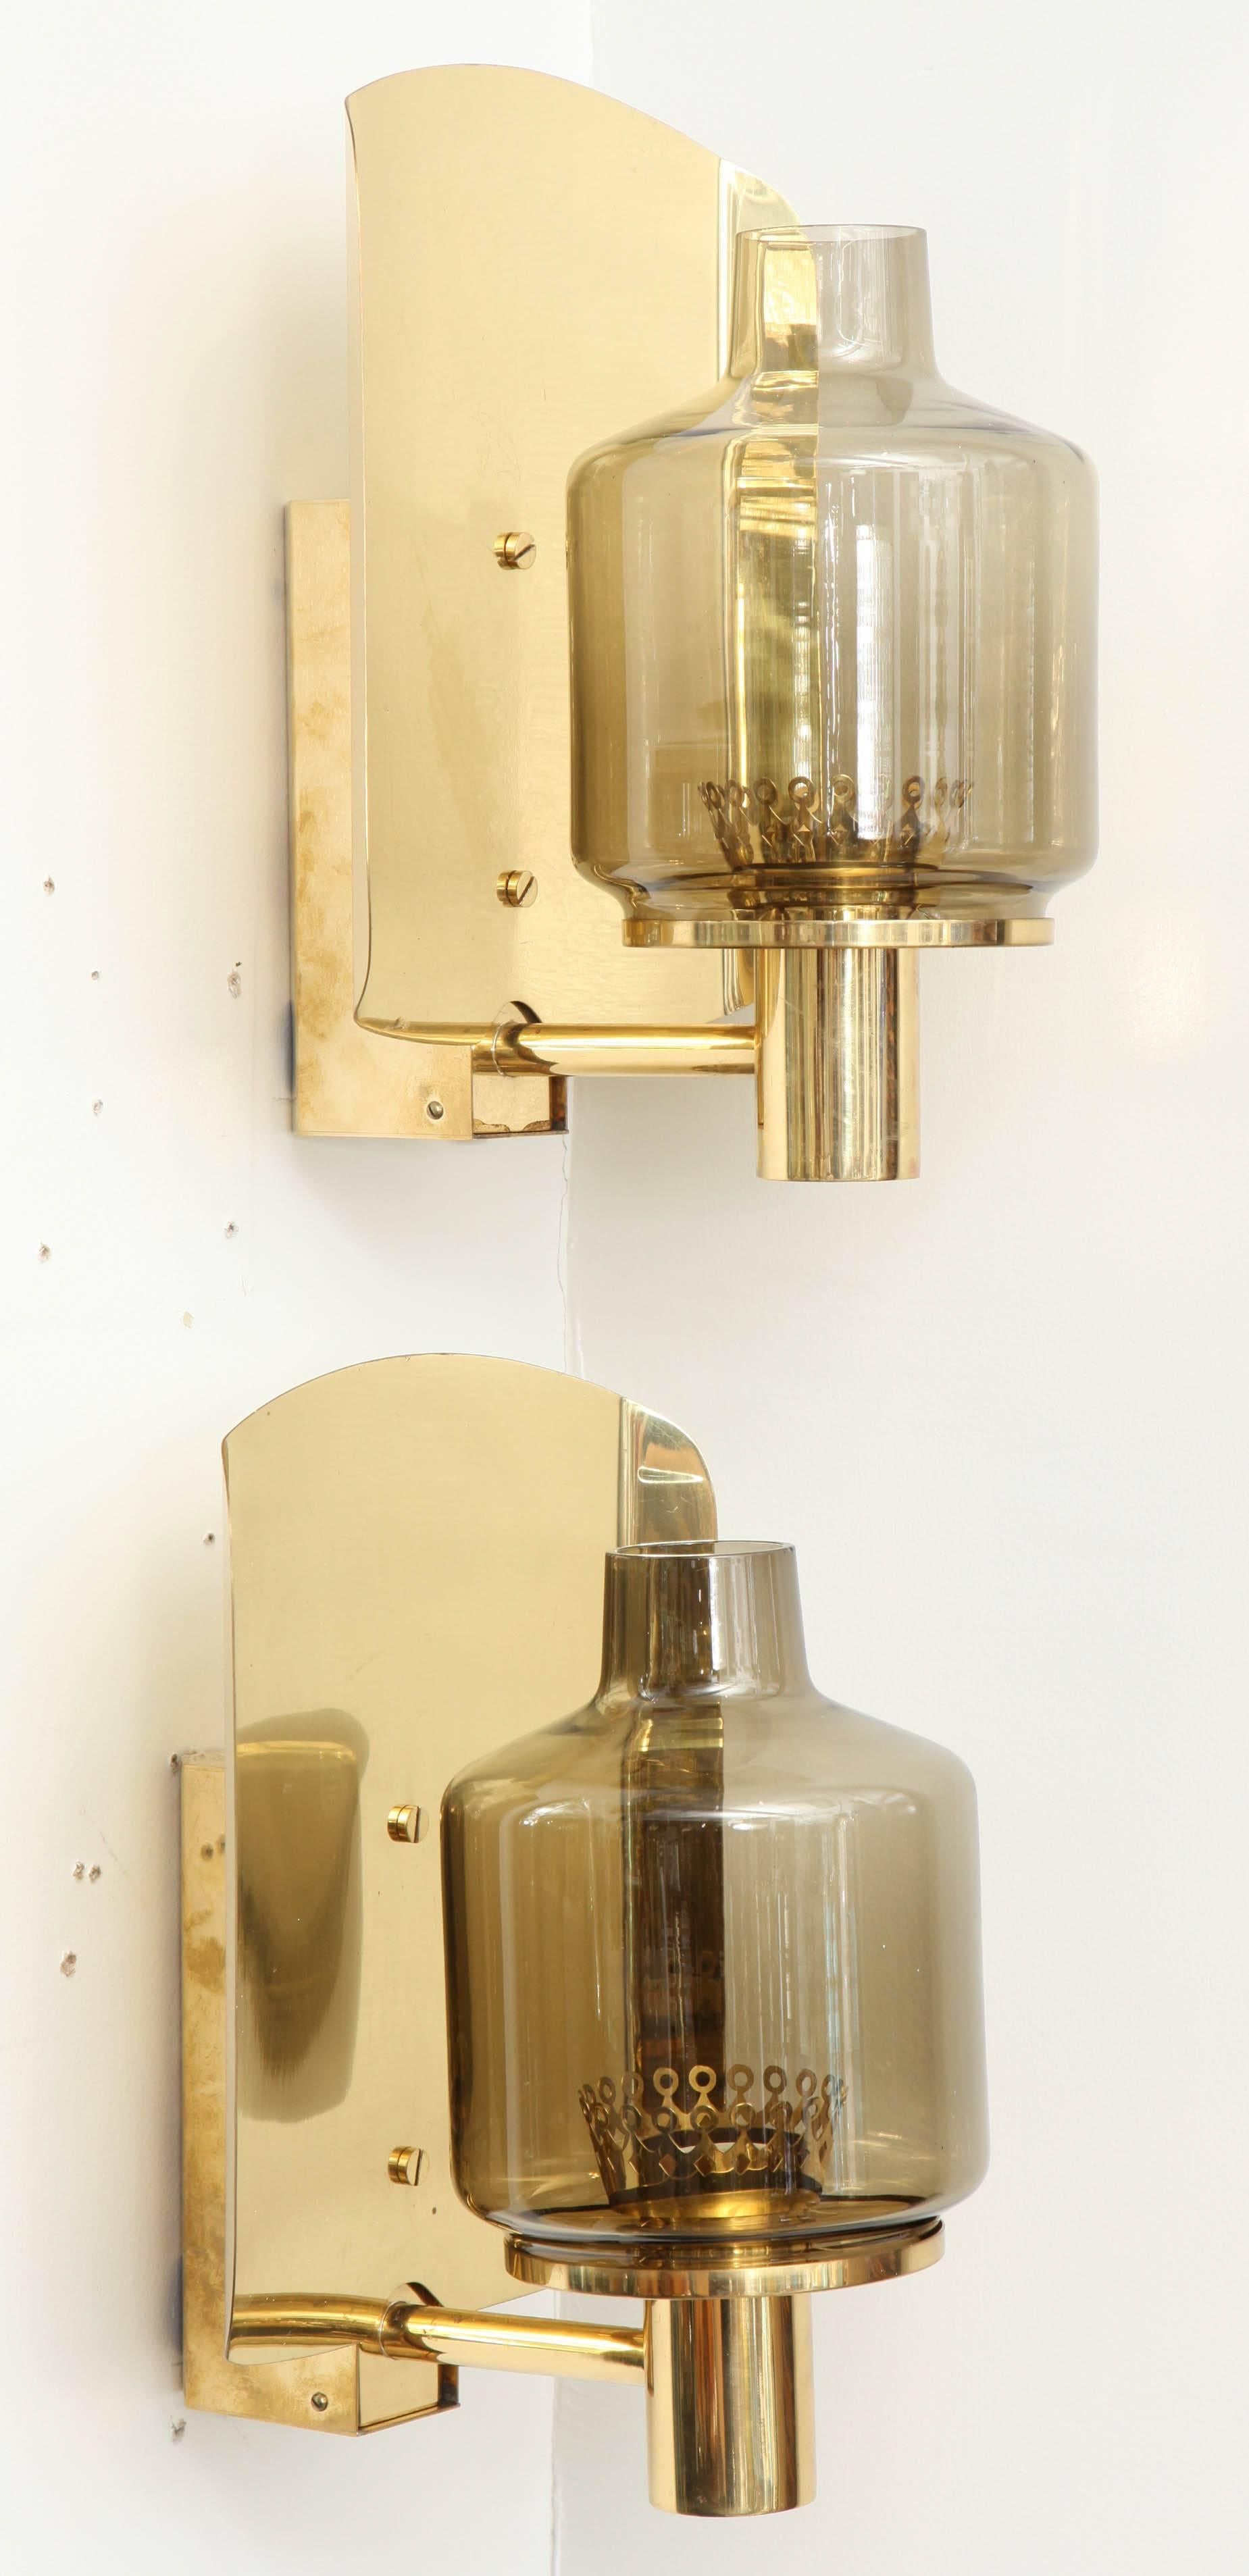 Pair of large-scale sconces composed of smoked glass globes on brass supports. Rewired for use in the USA.